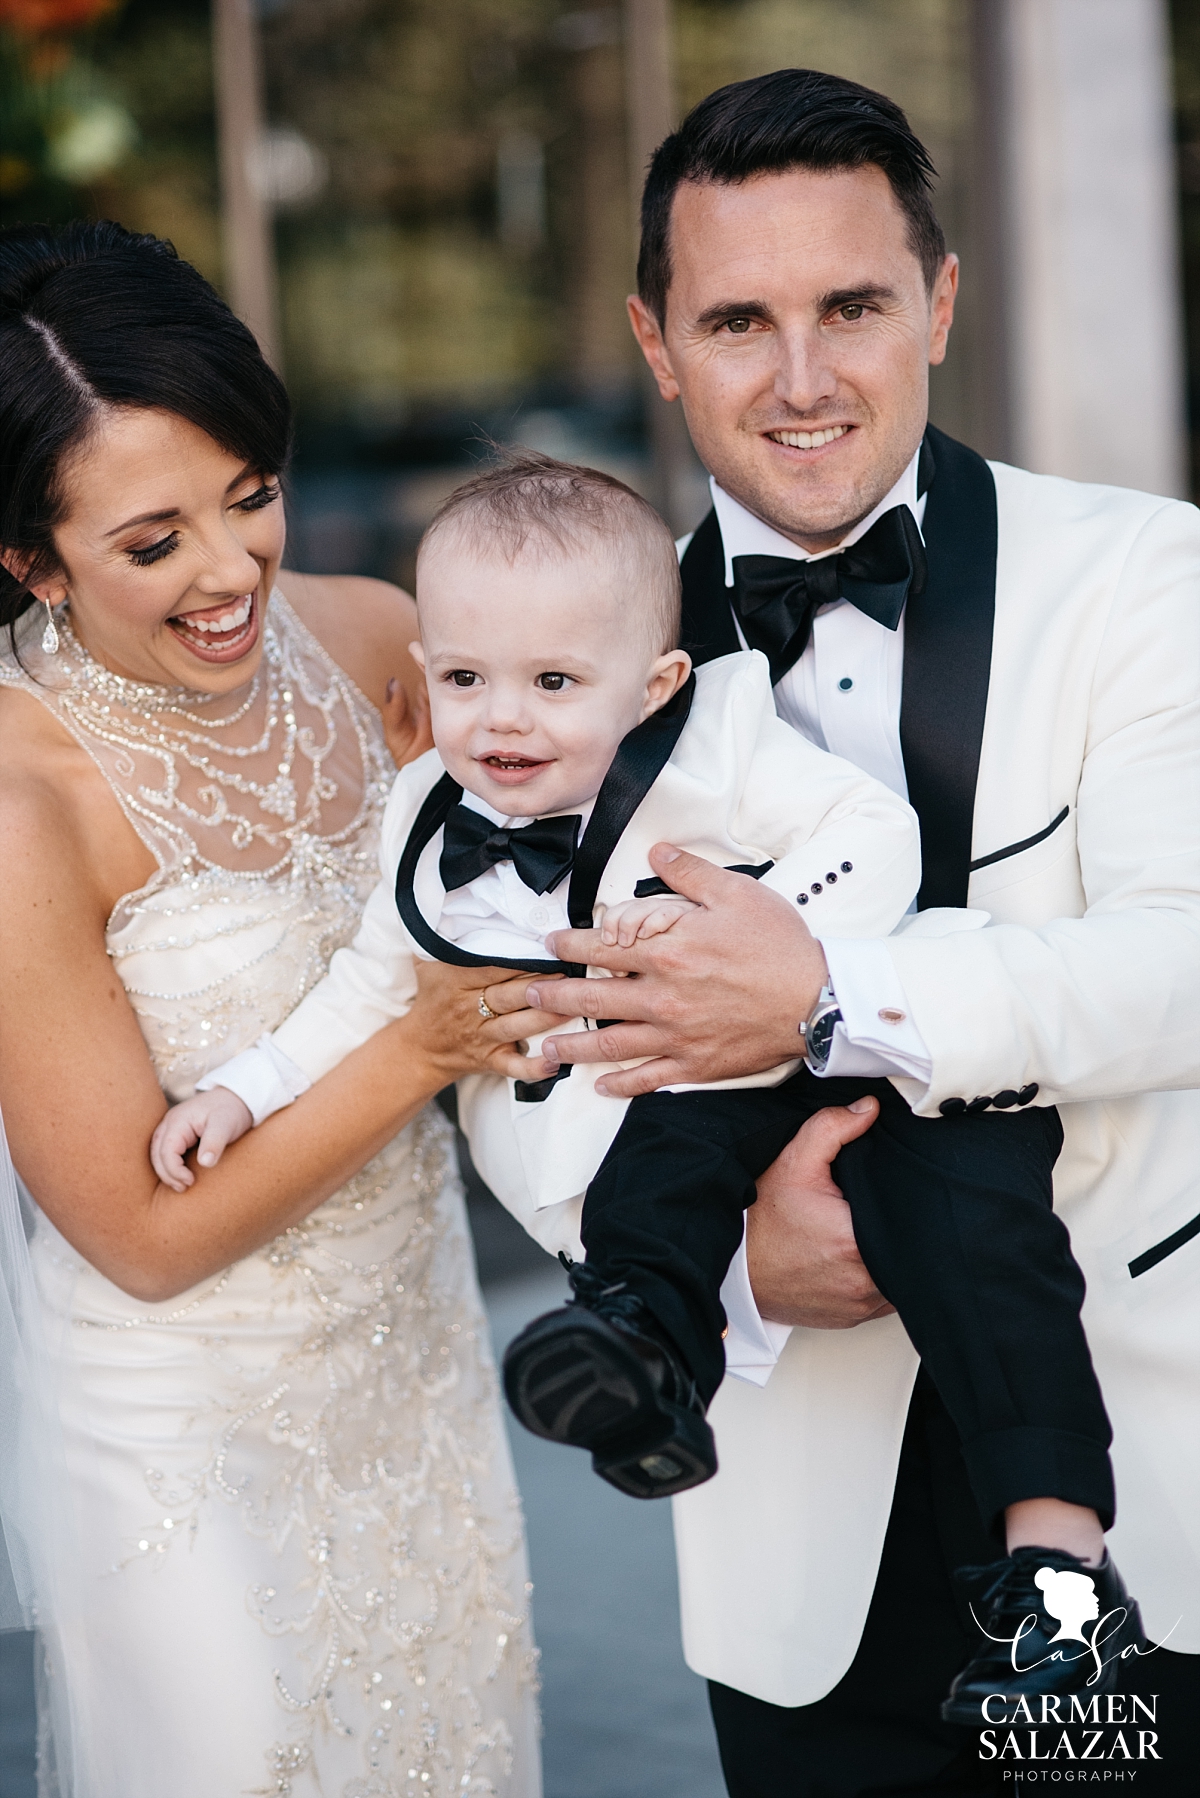 Bride and groom celebrating with baby before ceremony - Carmen Salazar